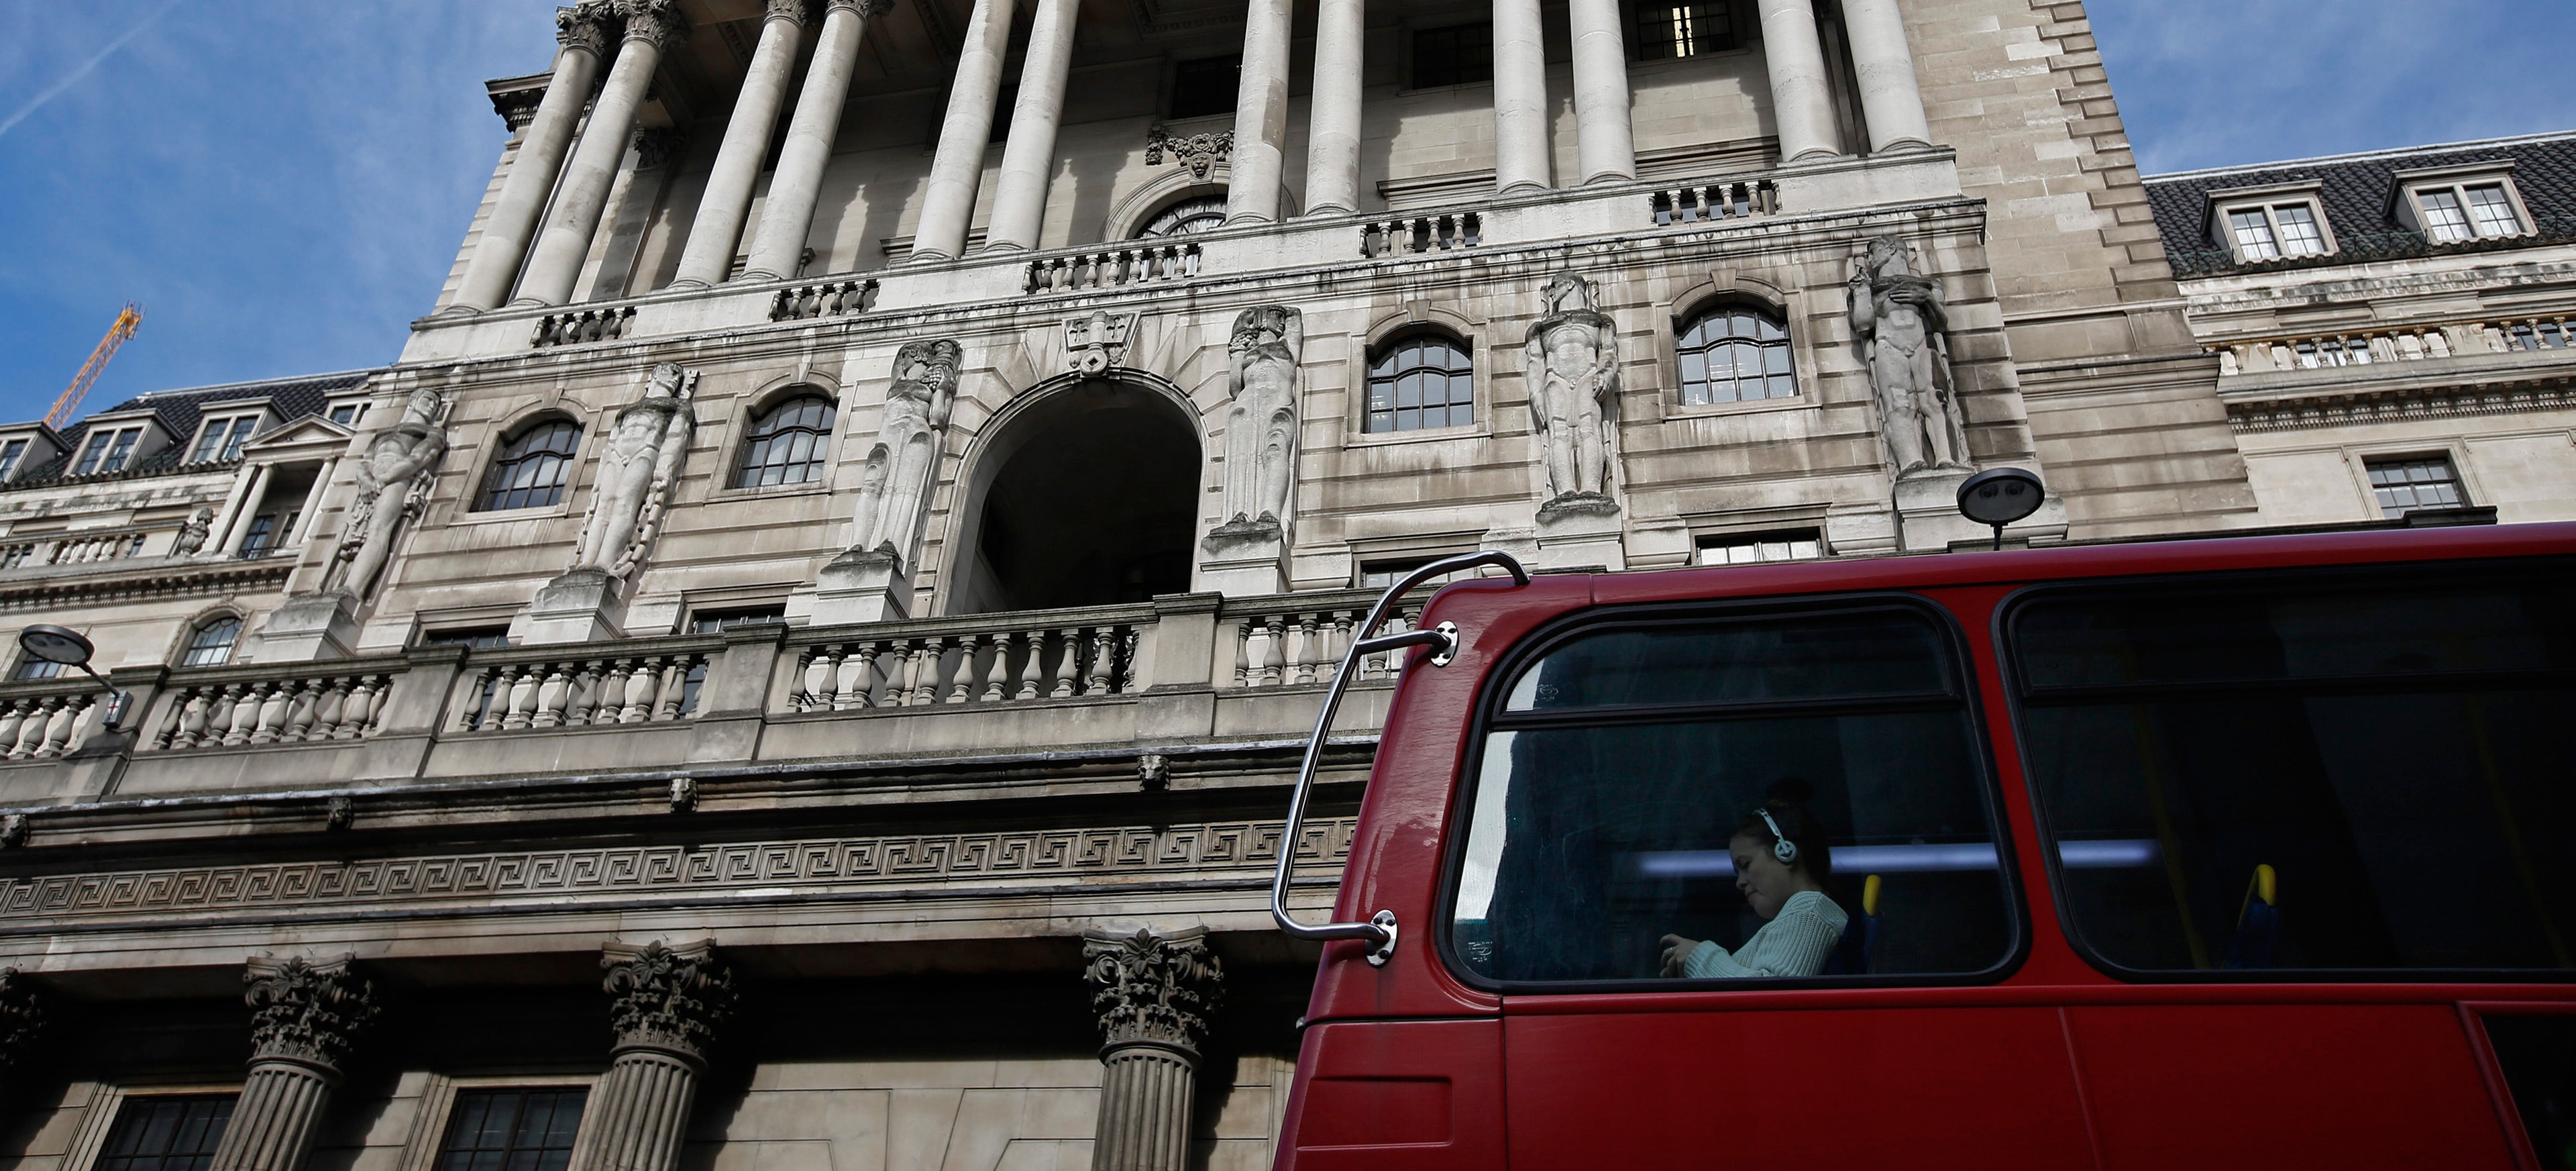 BOE's Fair and Effective Markets Review or Common Sense